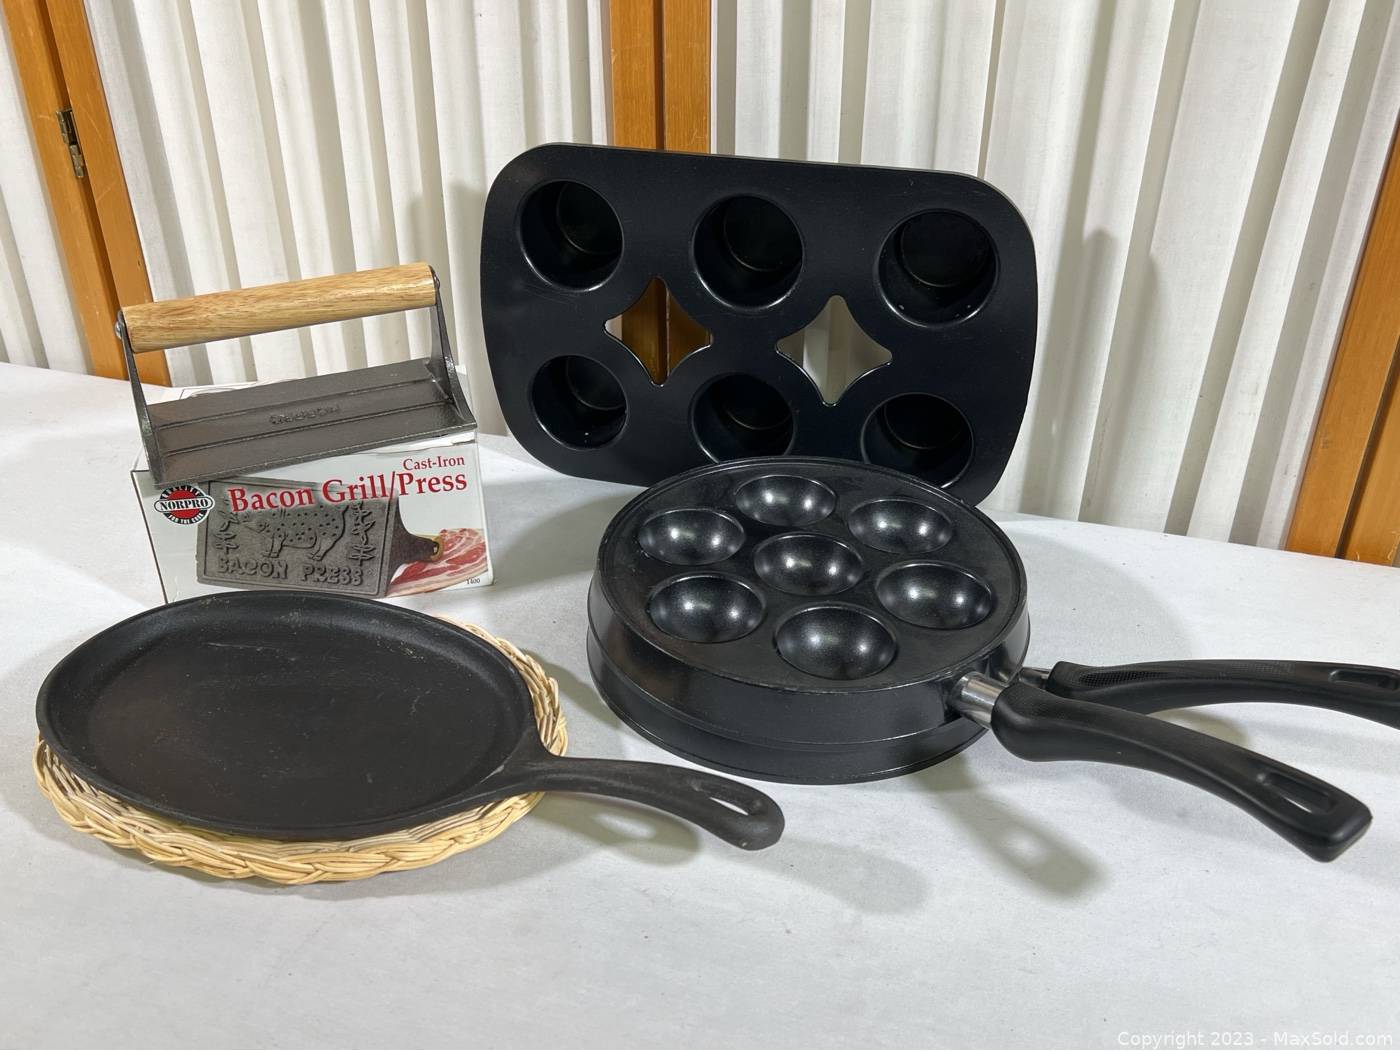 https://d12srav5gxm0re.cloudfront.net/auctionimages/88352/1703199289/wcast_iron_kitchen_ware_and_more-163-1.jpeg